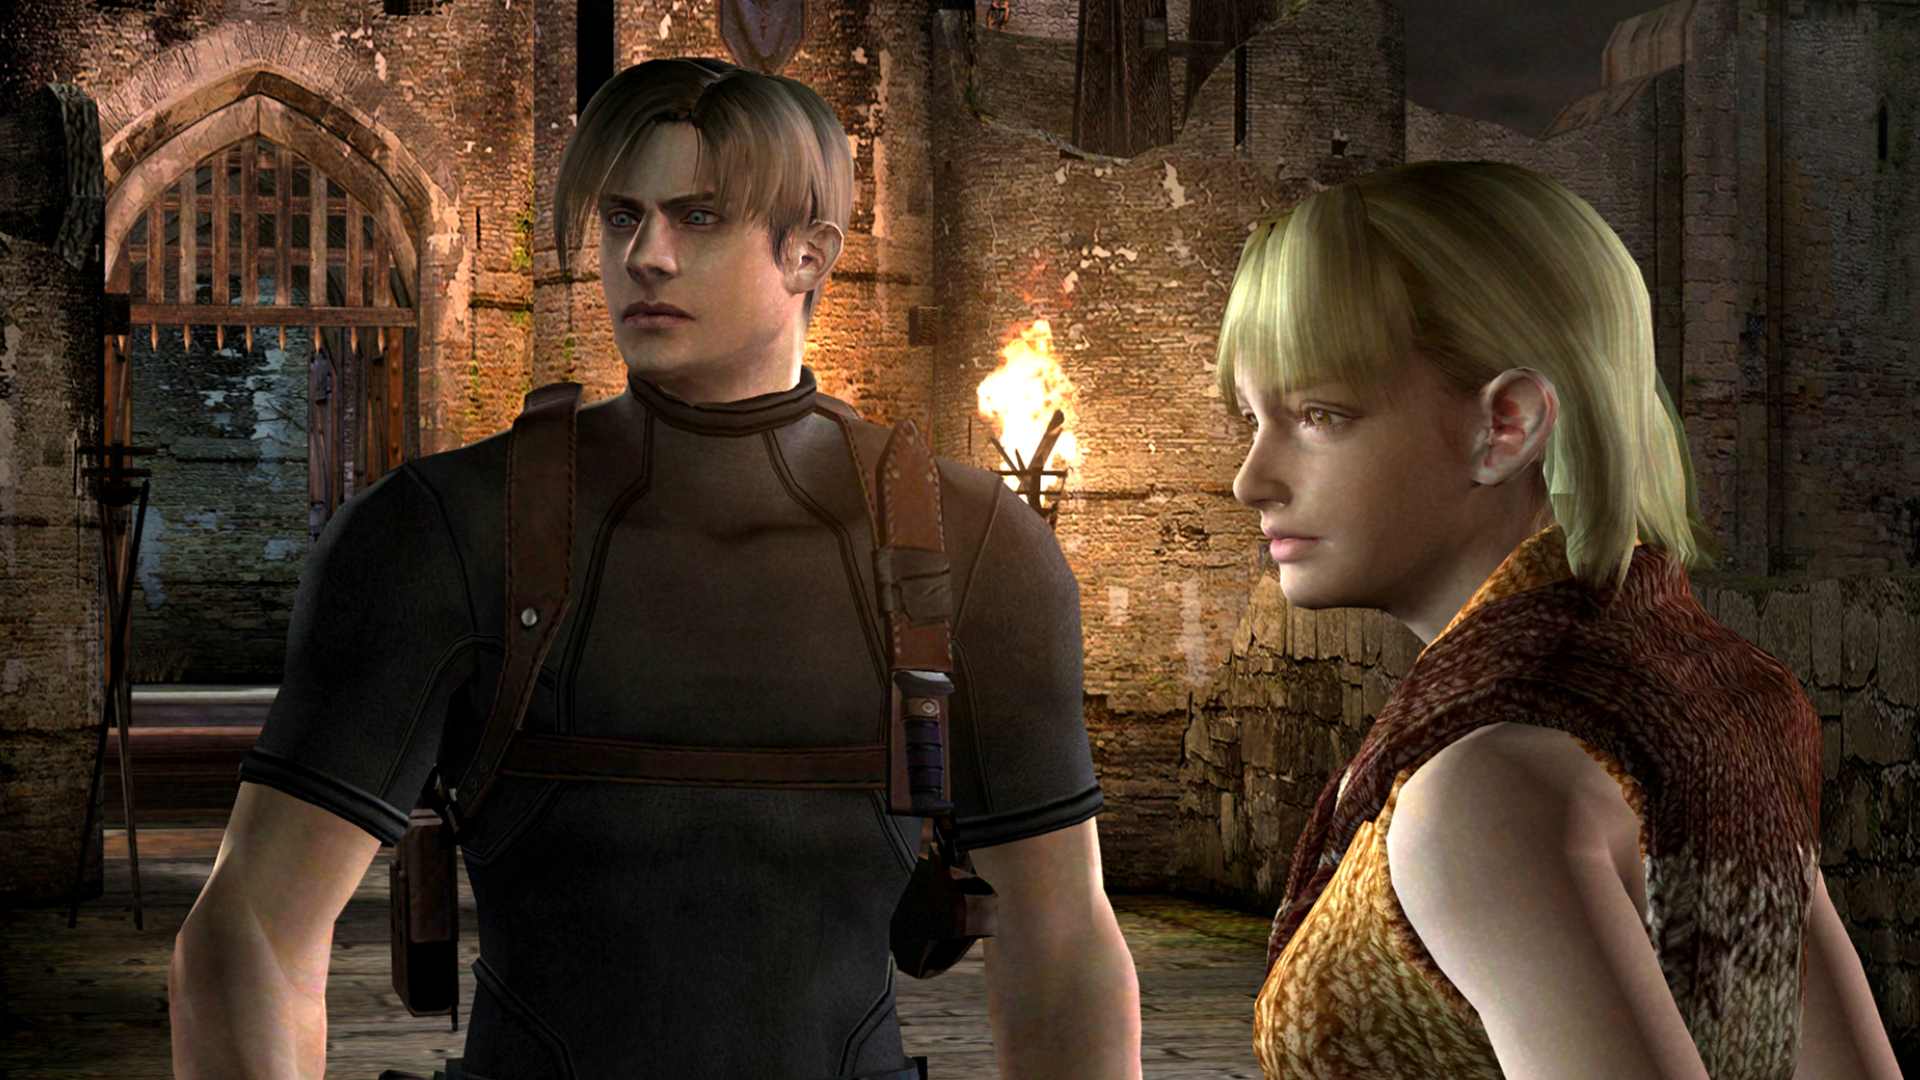 The original Resident Evil 4 is a near-perfect game that's aged magnificently.